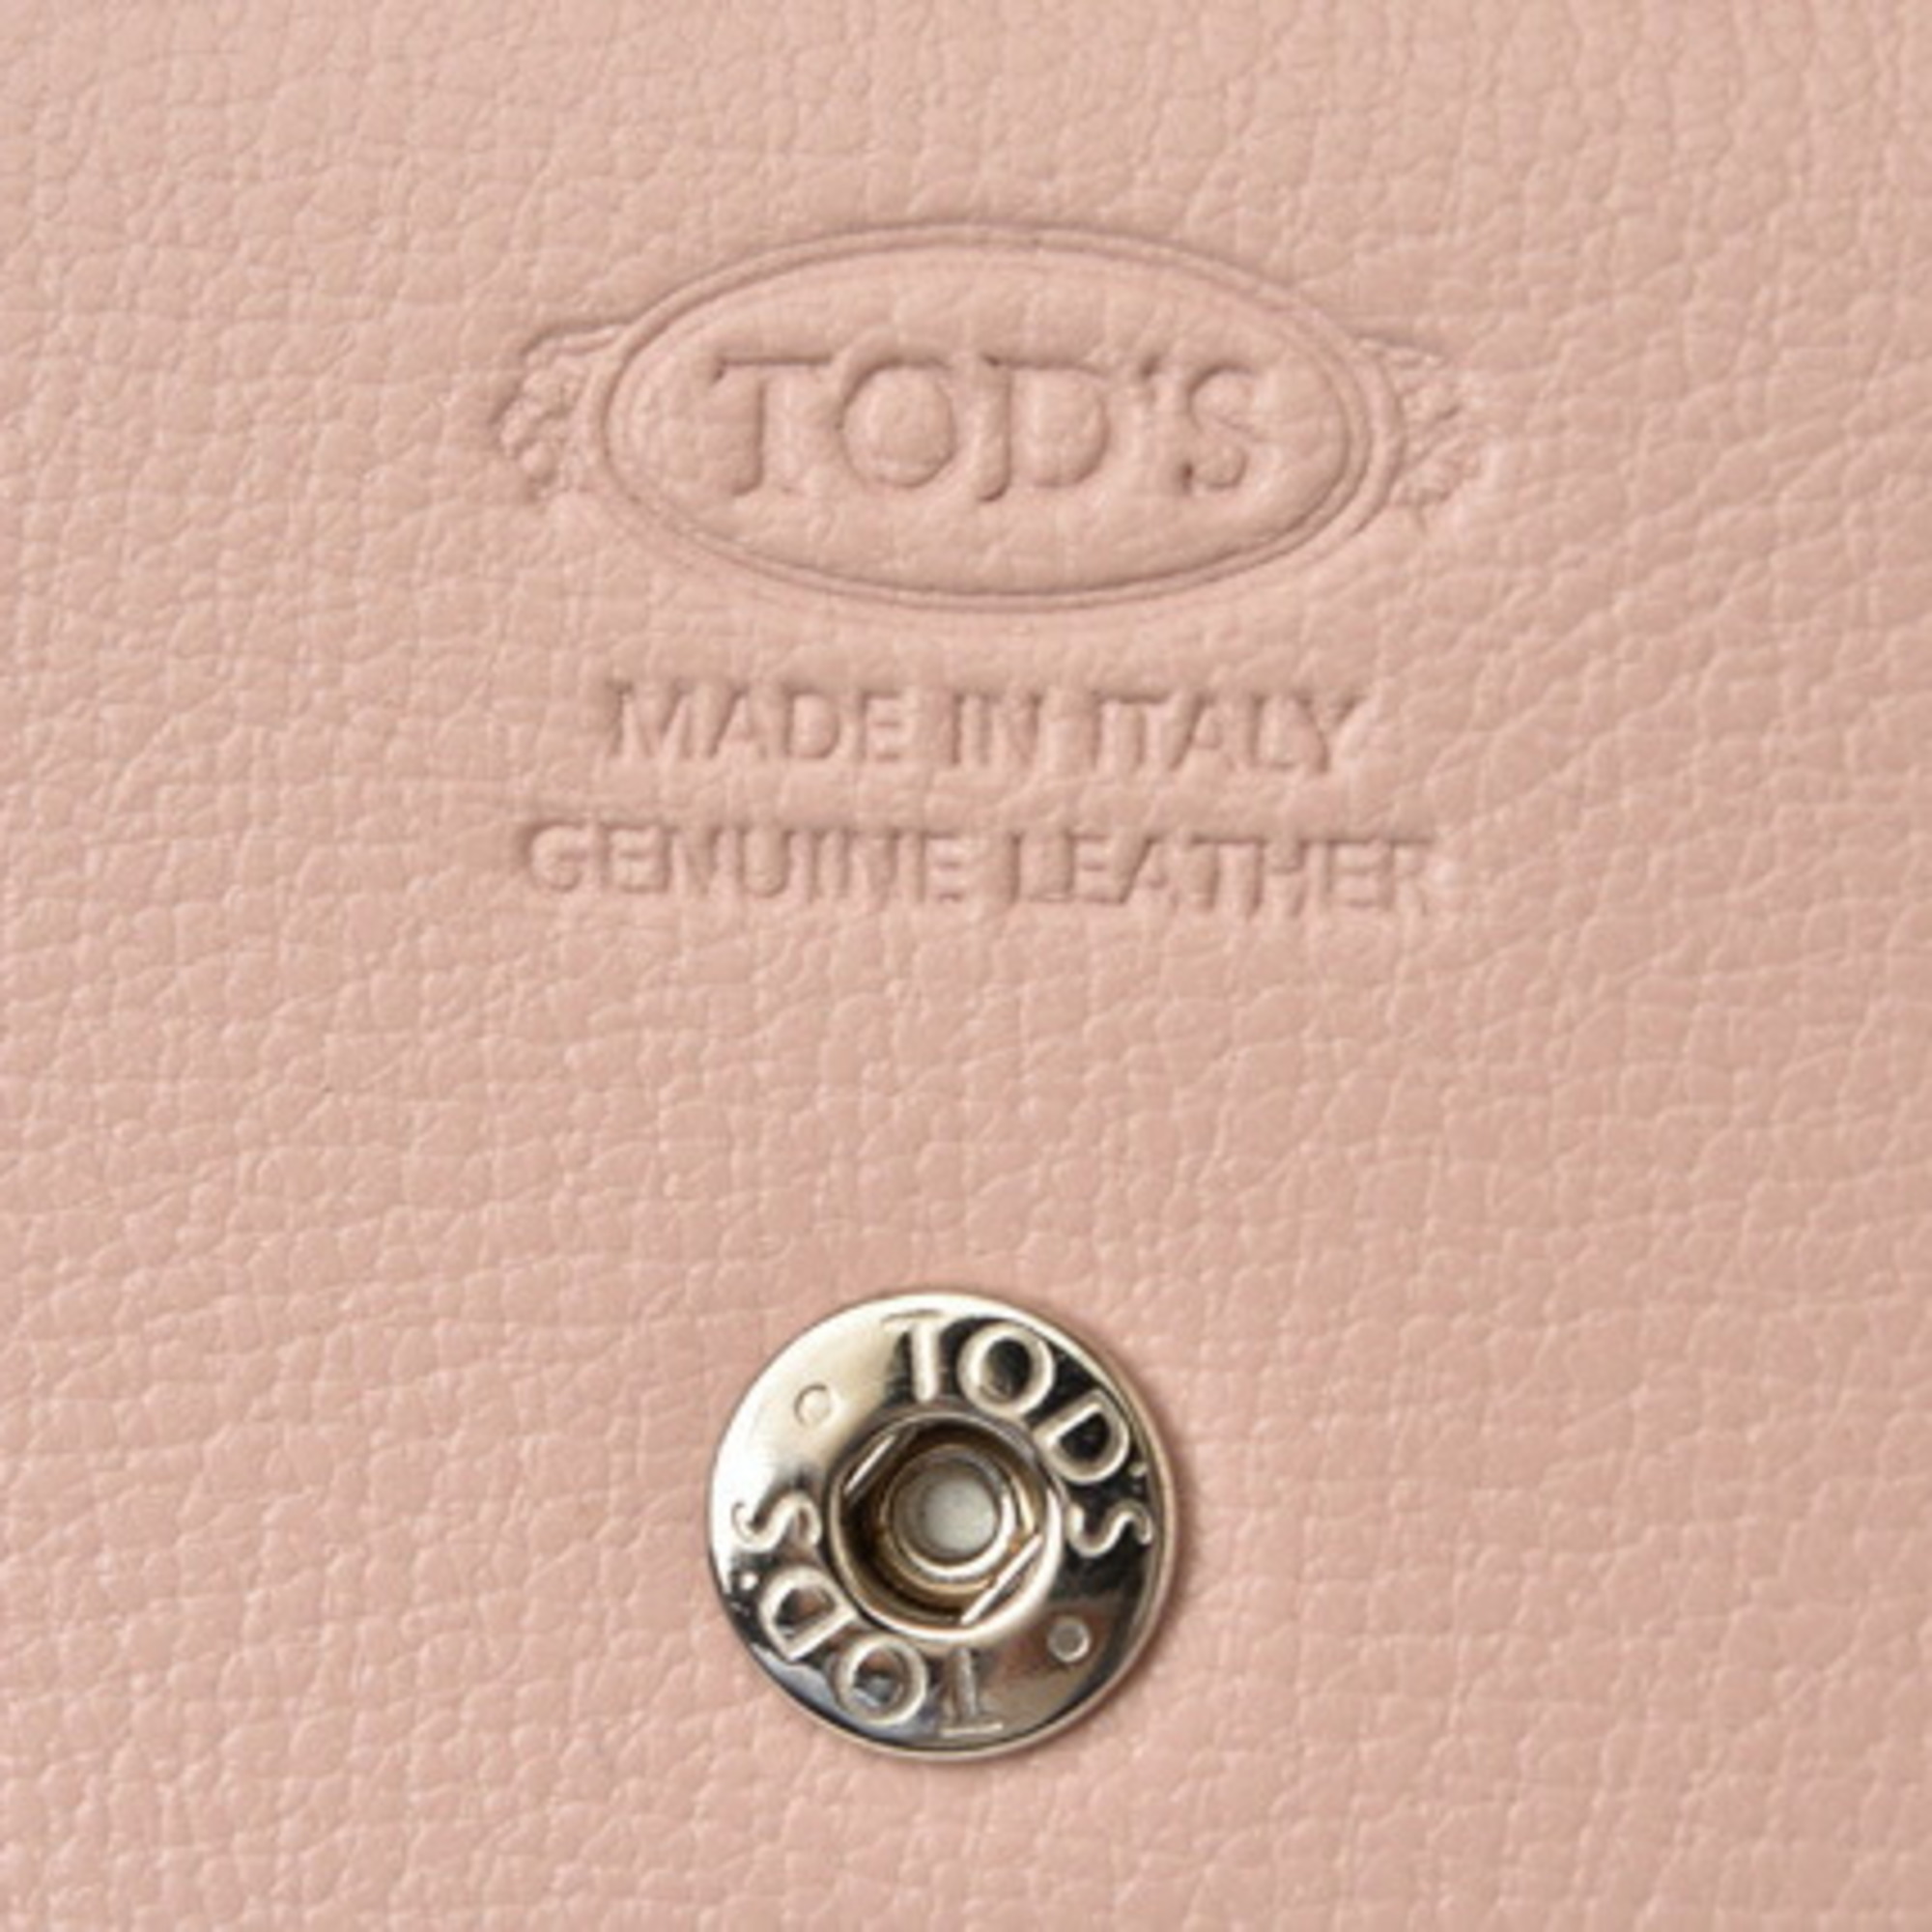 Tod's Key Case TOD'S Leather Light Pink XAWENTG1600XAOM001